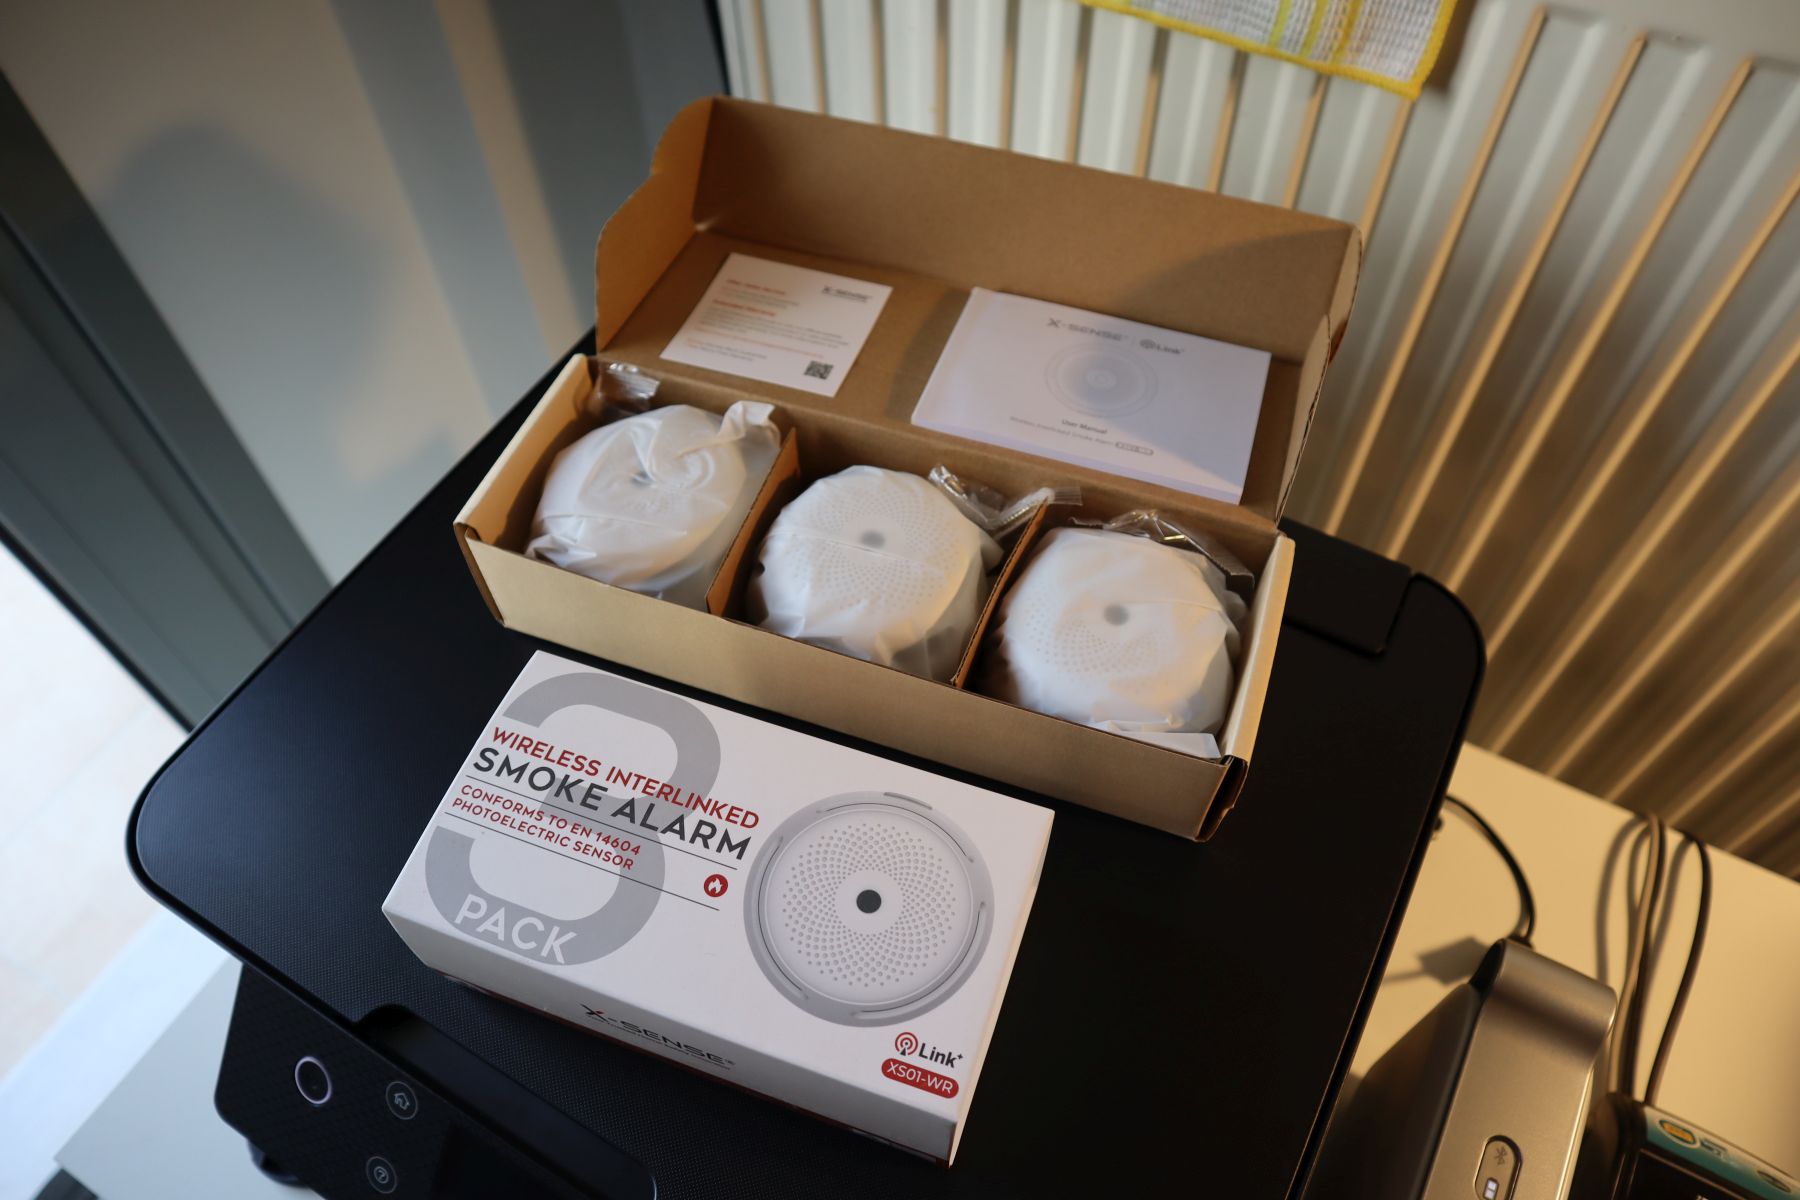 This X-Sense wireless smoke detector covers your entire home – A detailed review